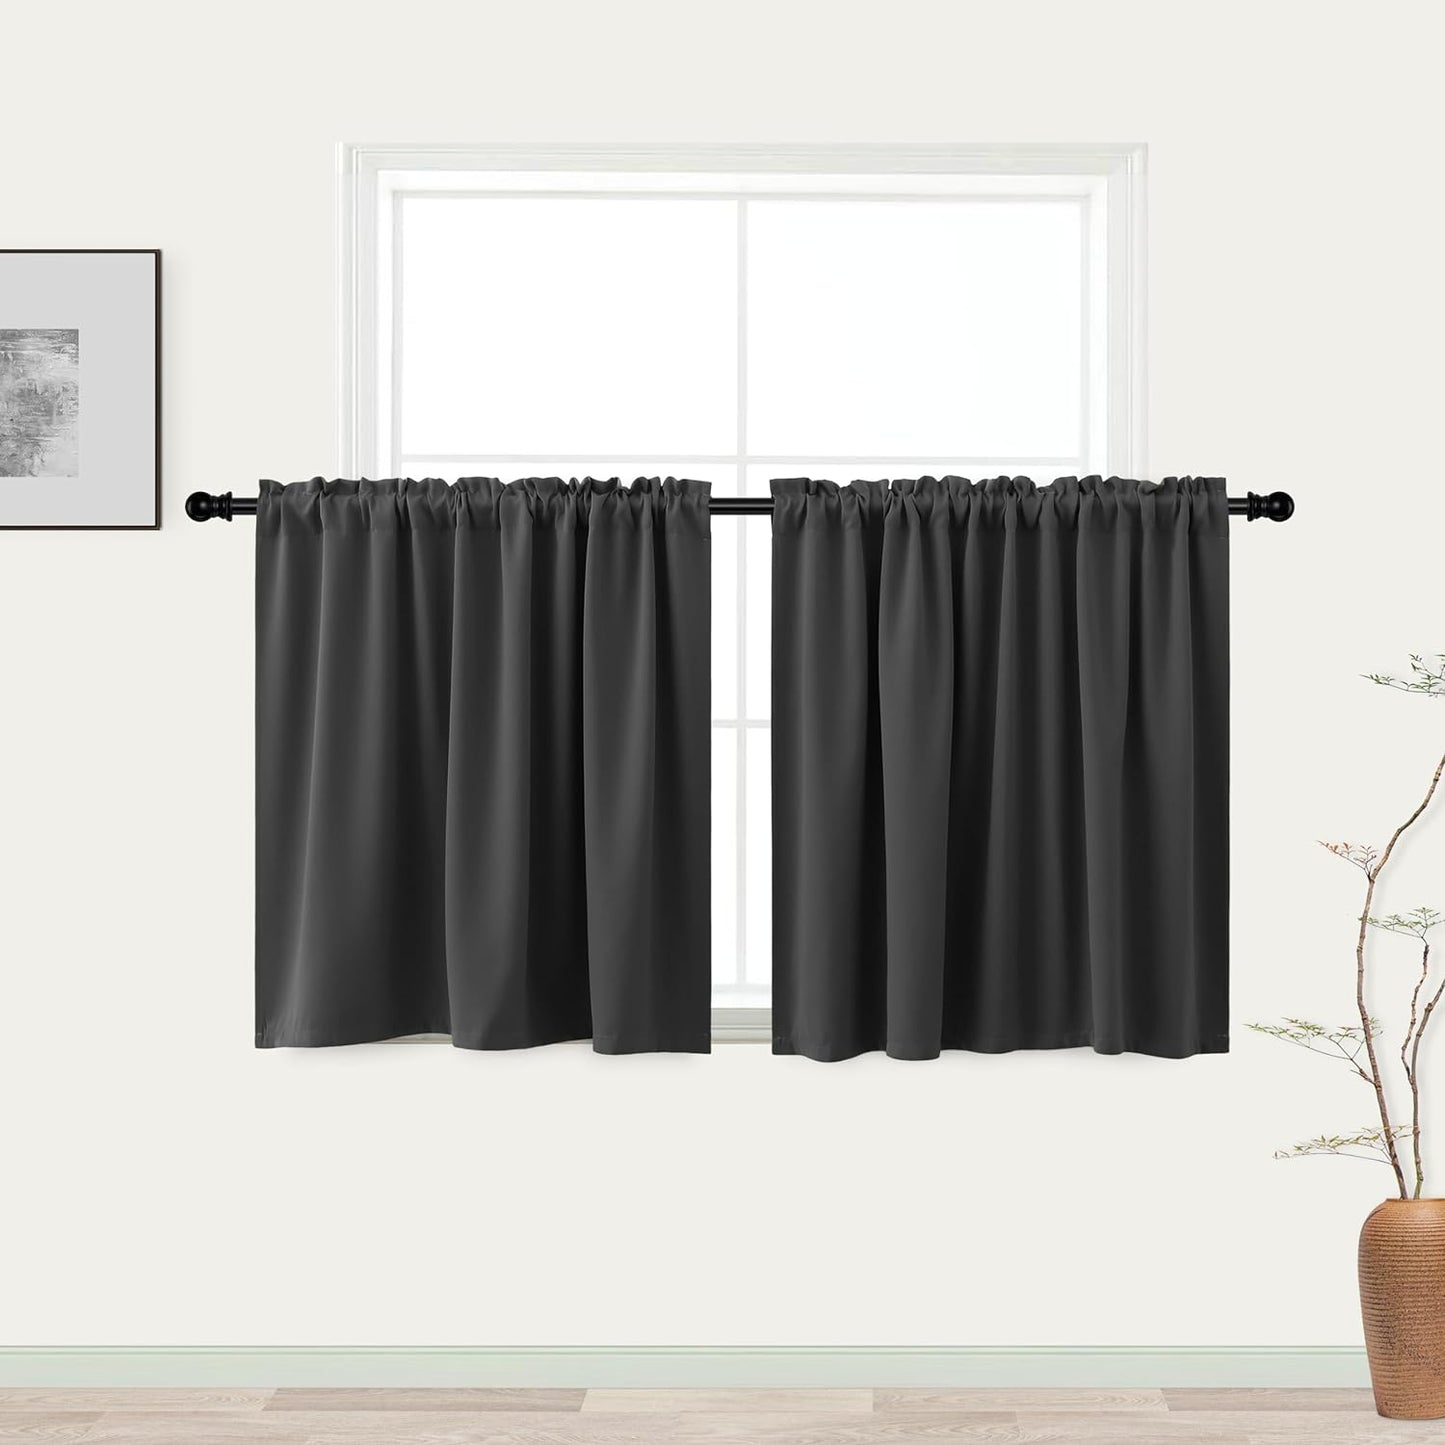 KOUFALL Sage Green Curtains 24 Inch Length for Bathroom Window 2 Pack Rod Pocket Room Darkening Cafe Curtain Tiers Blackout Light Green Short Curtains for Small Windows 34 by 24 in Long  KOUFALL TEXTILE Dark Gray 52X36 